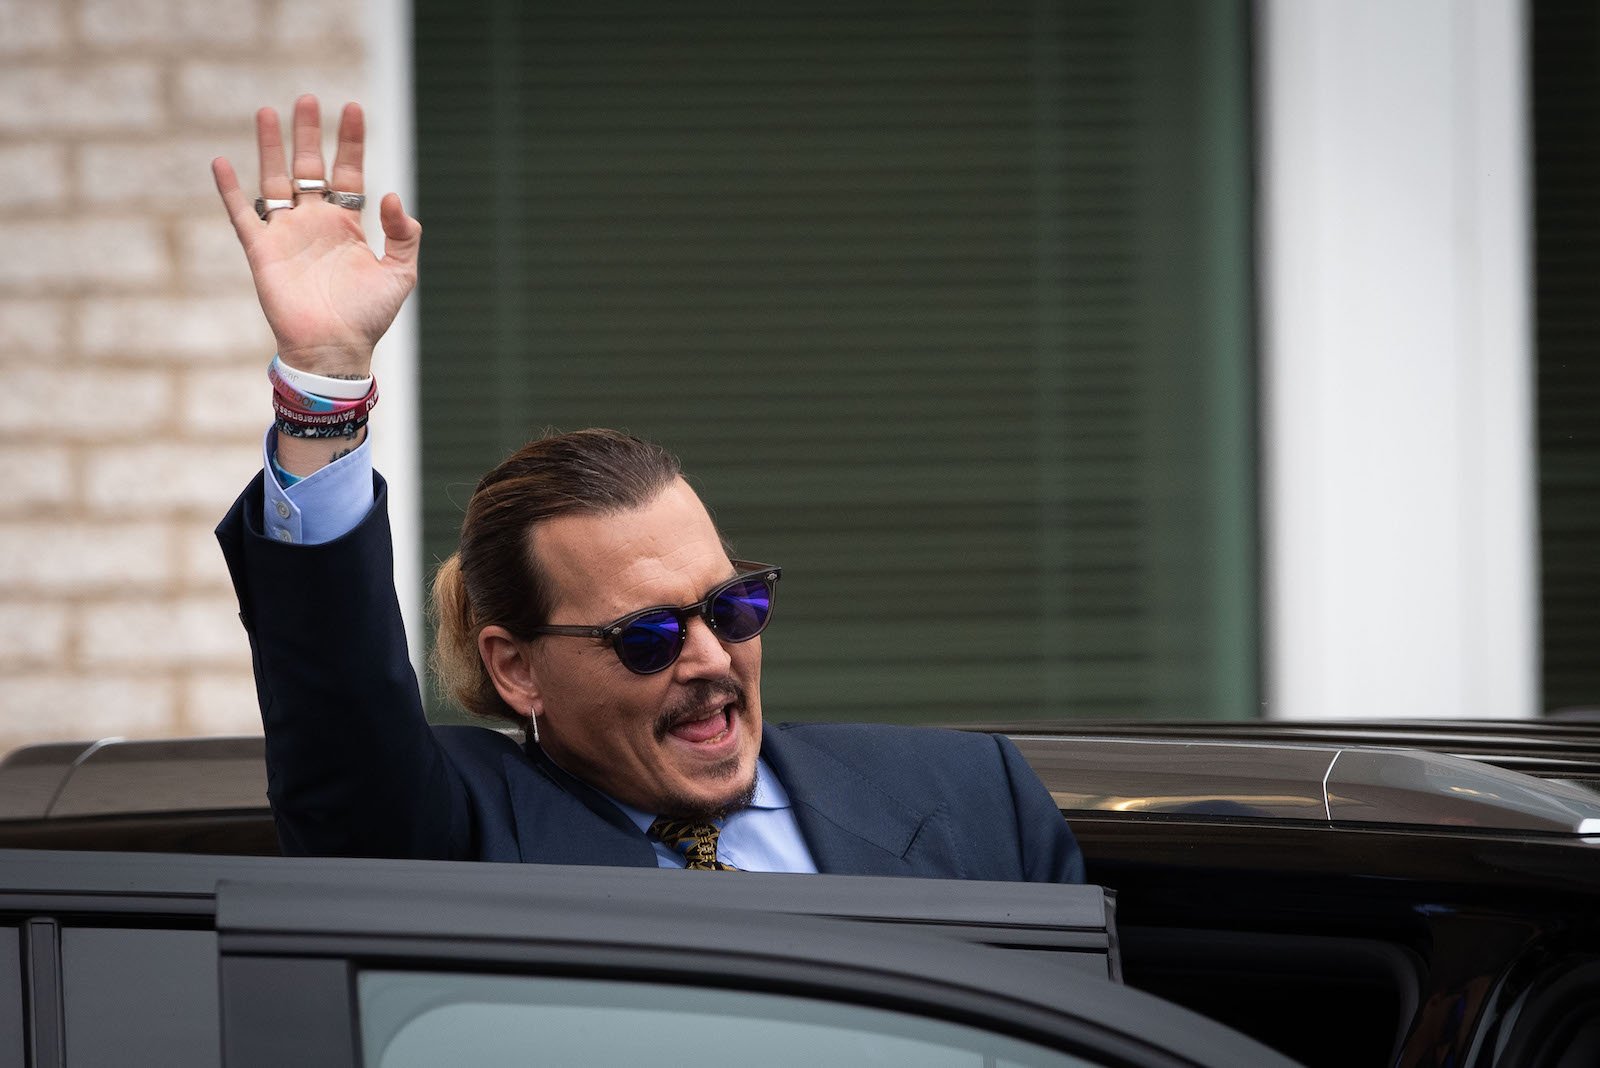 Johnny Depp waves to fans outside court 